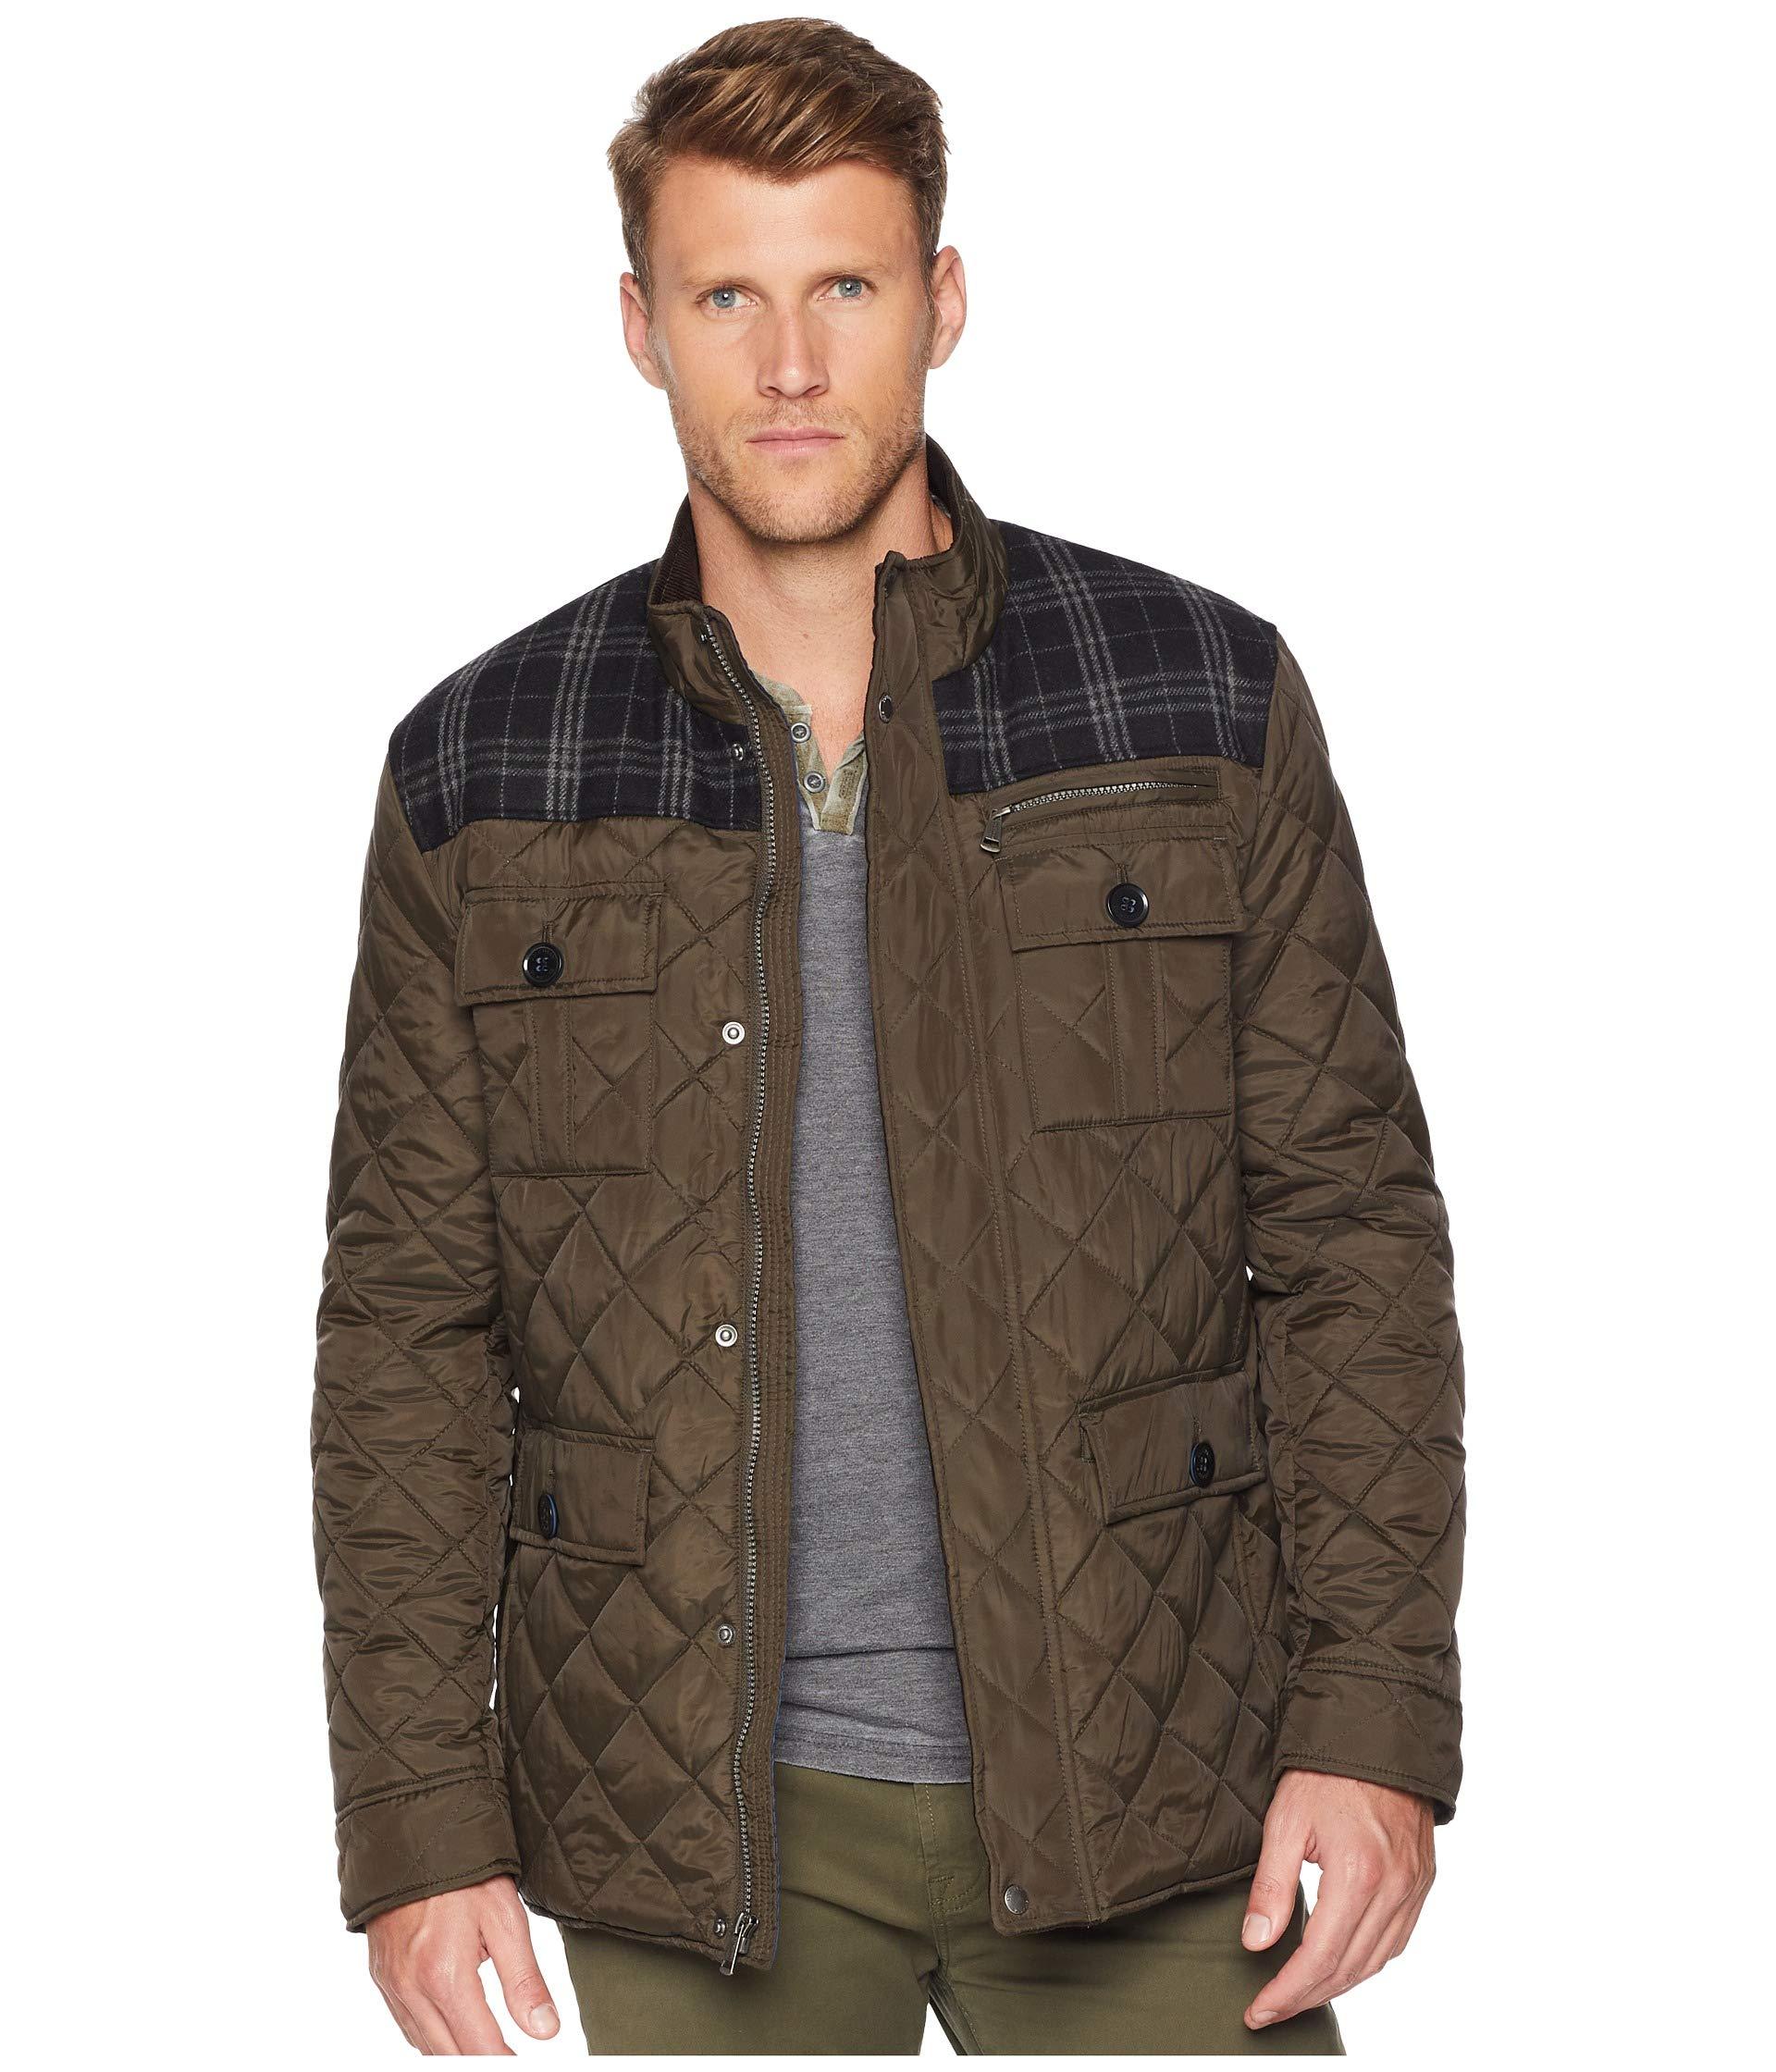 Cole Haan Synthetic Mixed Media Multi-pockets Quilted Jacket in Olive